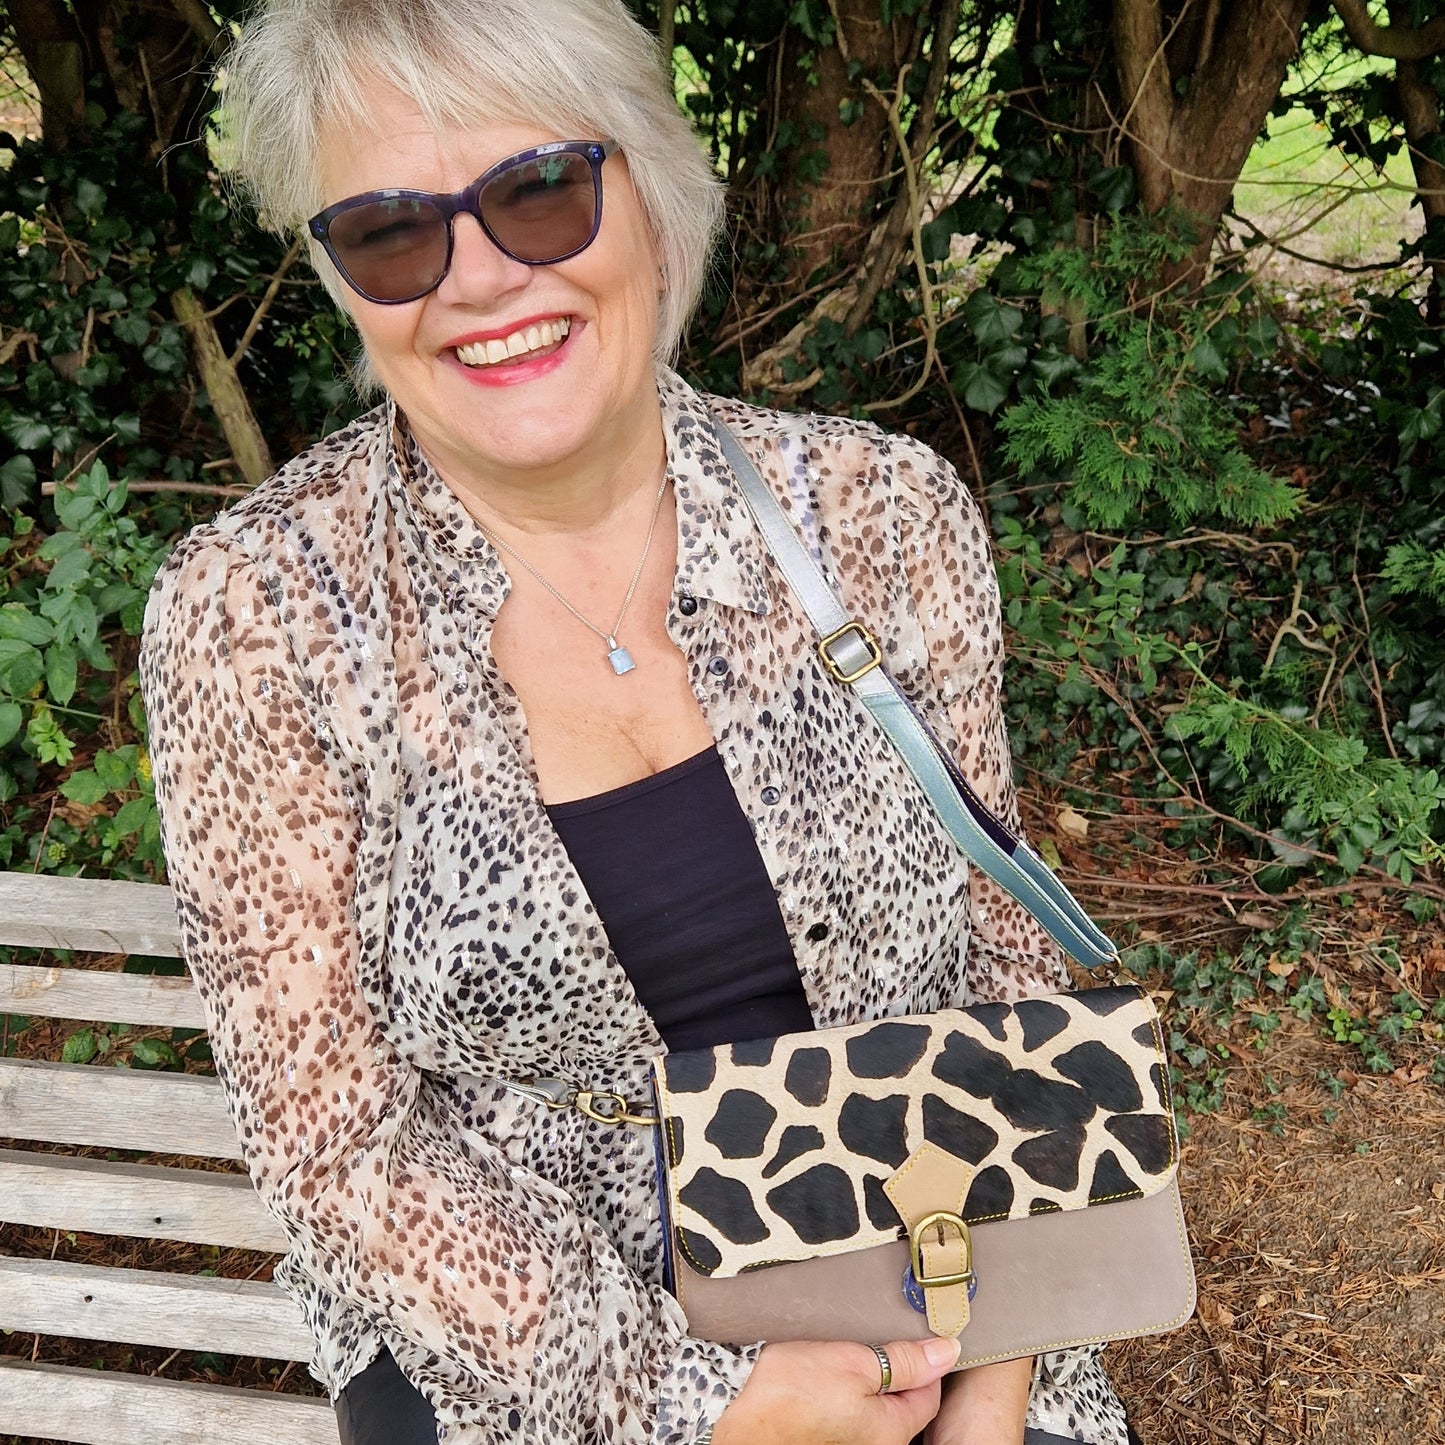 Lady carrying a leather bag in multi colours with panel of textured animal print.